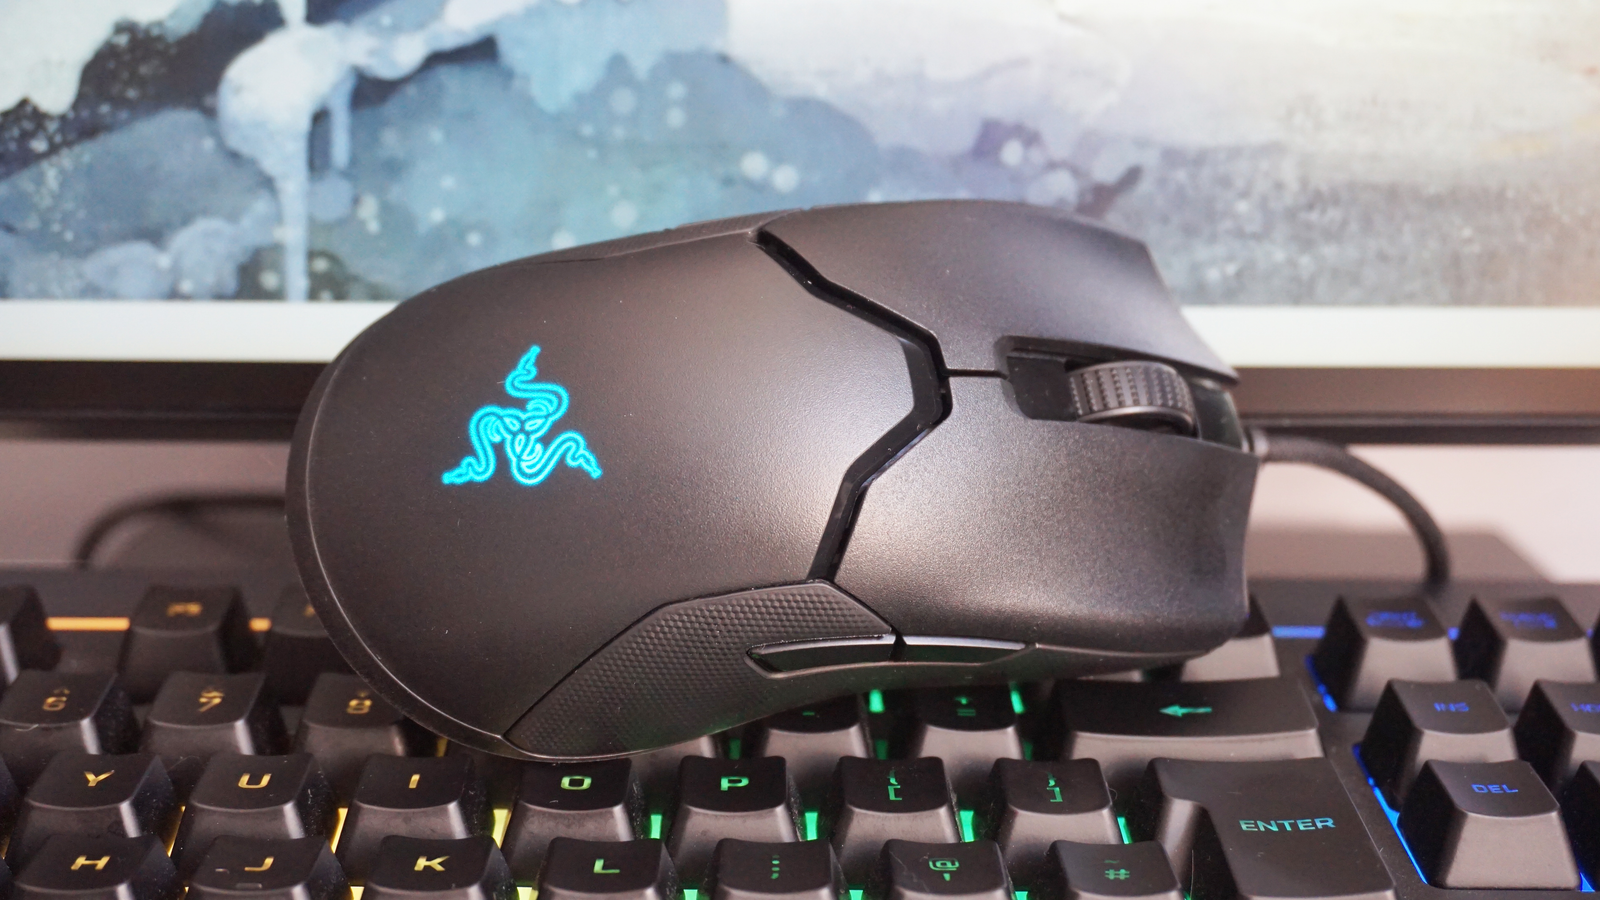 Razer Viper review: An ultralight ambidextrous gaming mouse